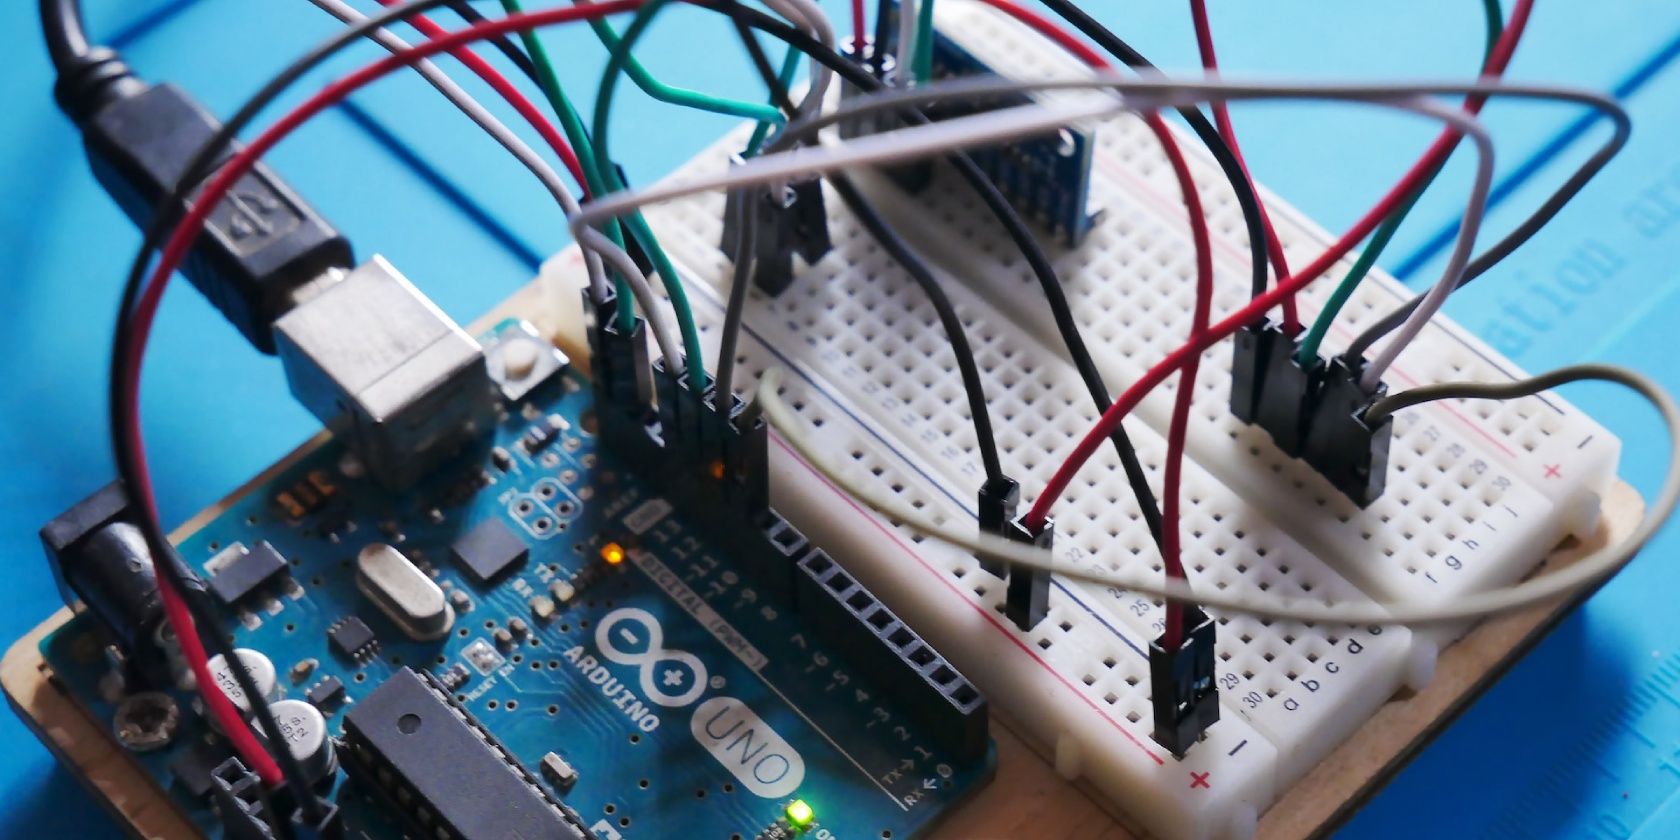 An Arduino Uno board wired to a couple of sensors on a breadboard.